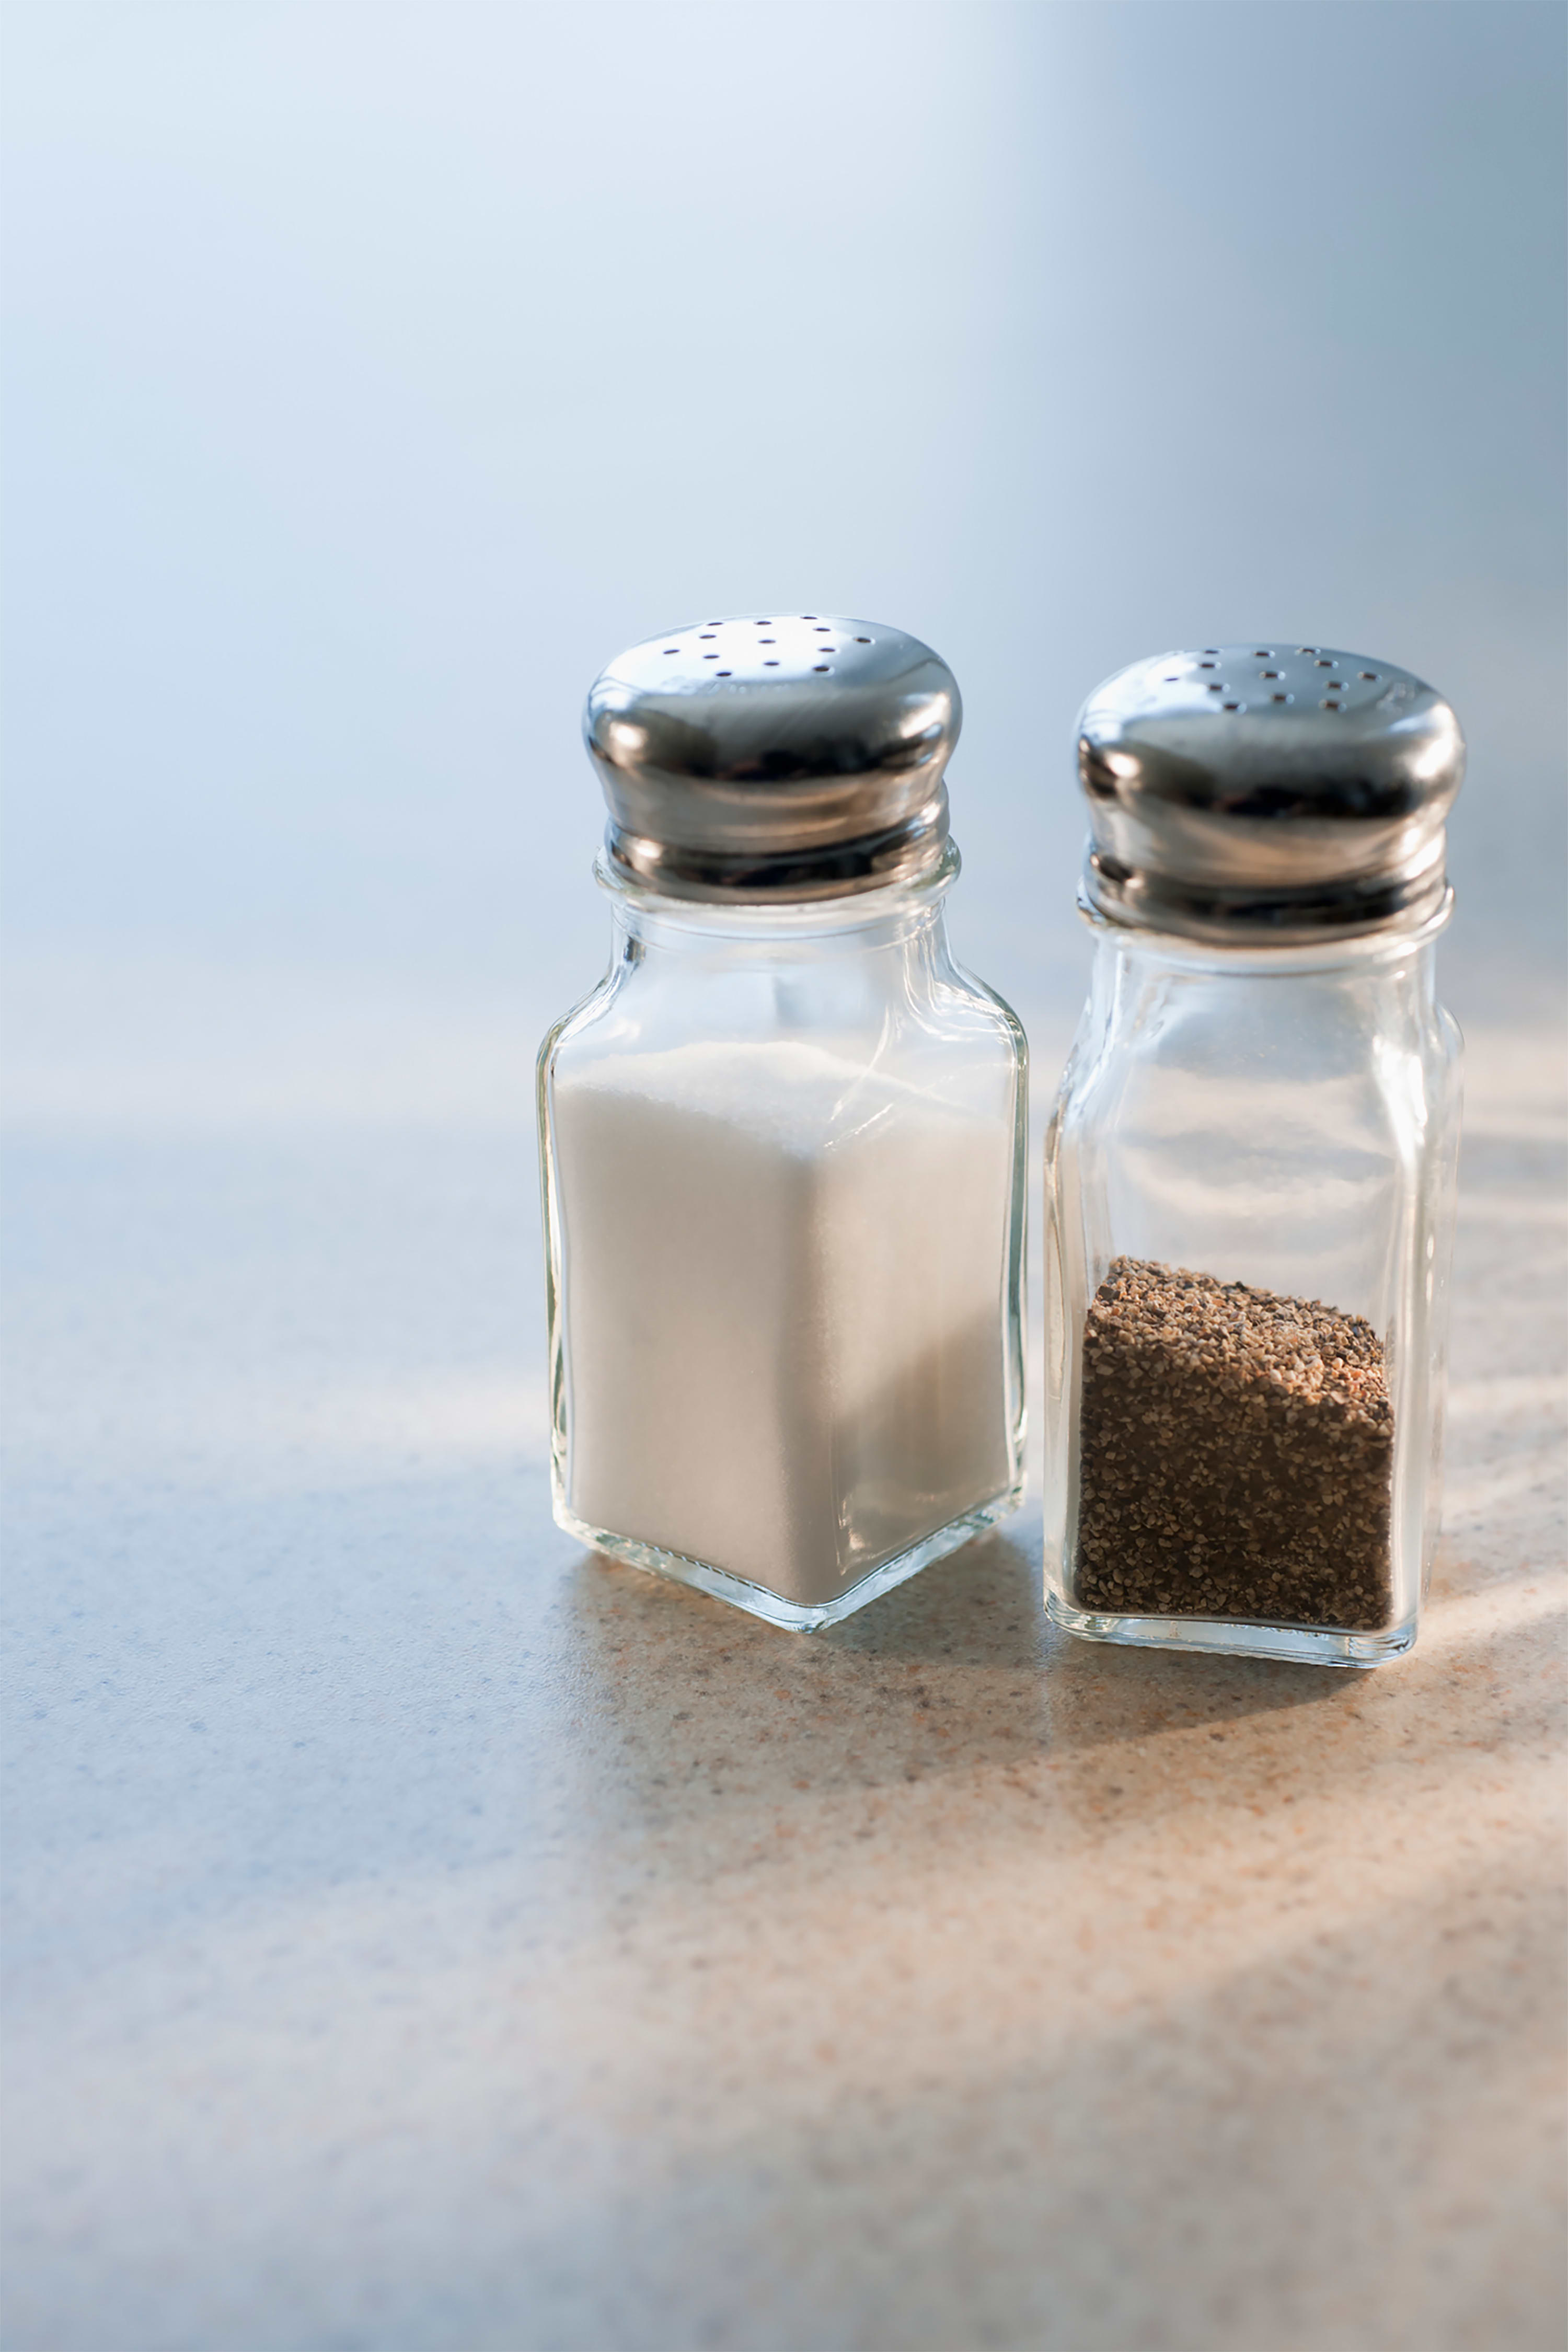 People Are Just Now Learning What Those Ridges On Salt Shakers Are For